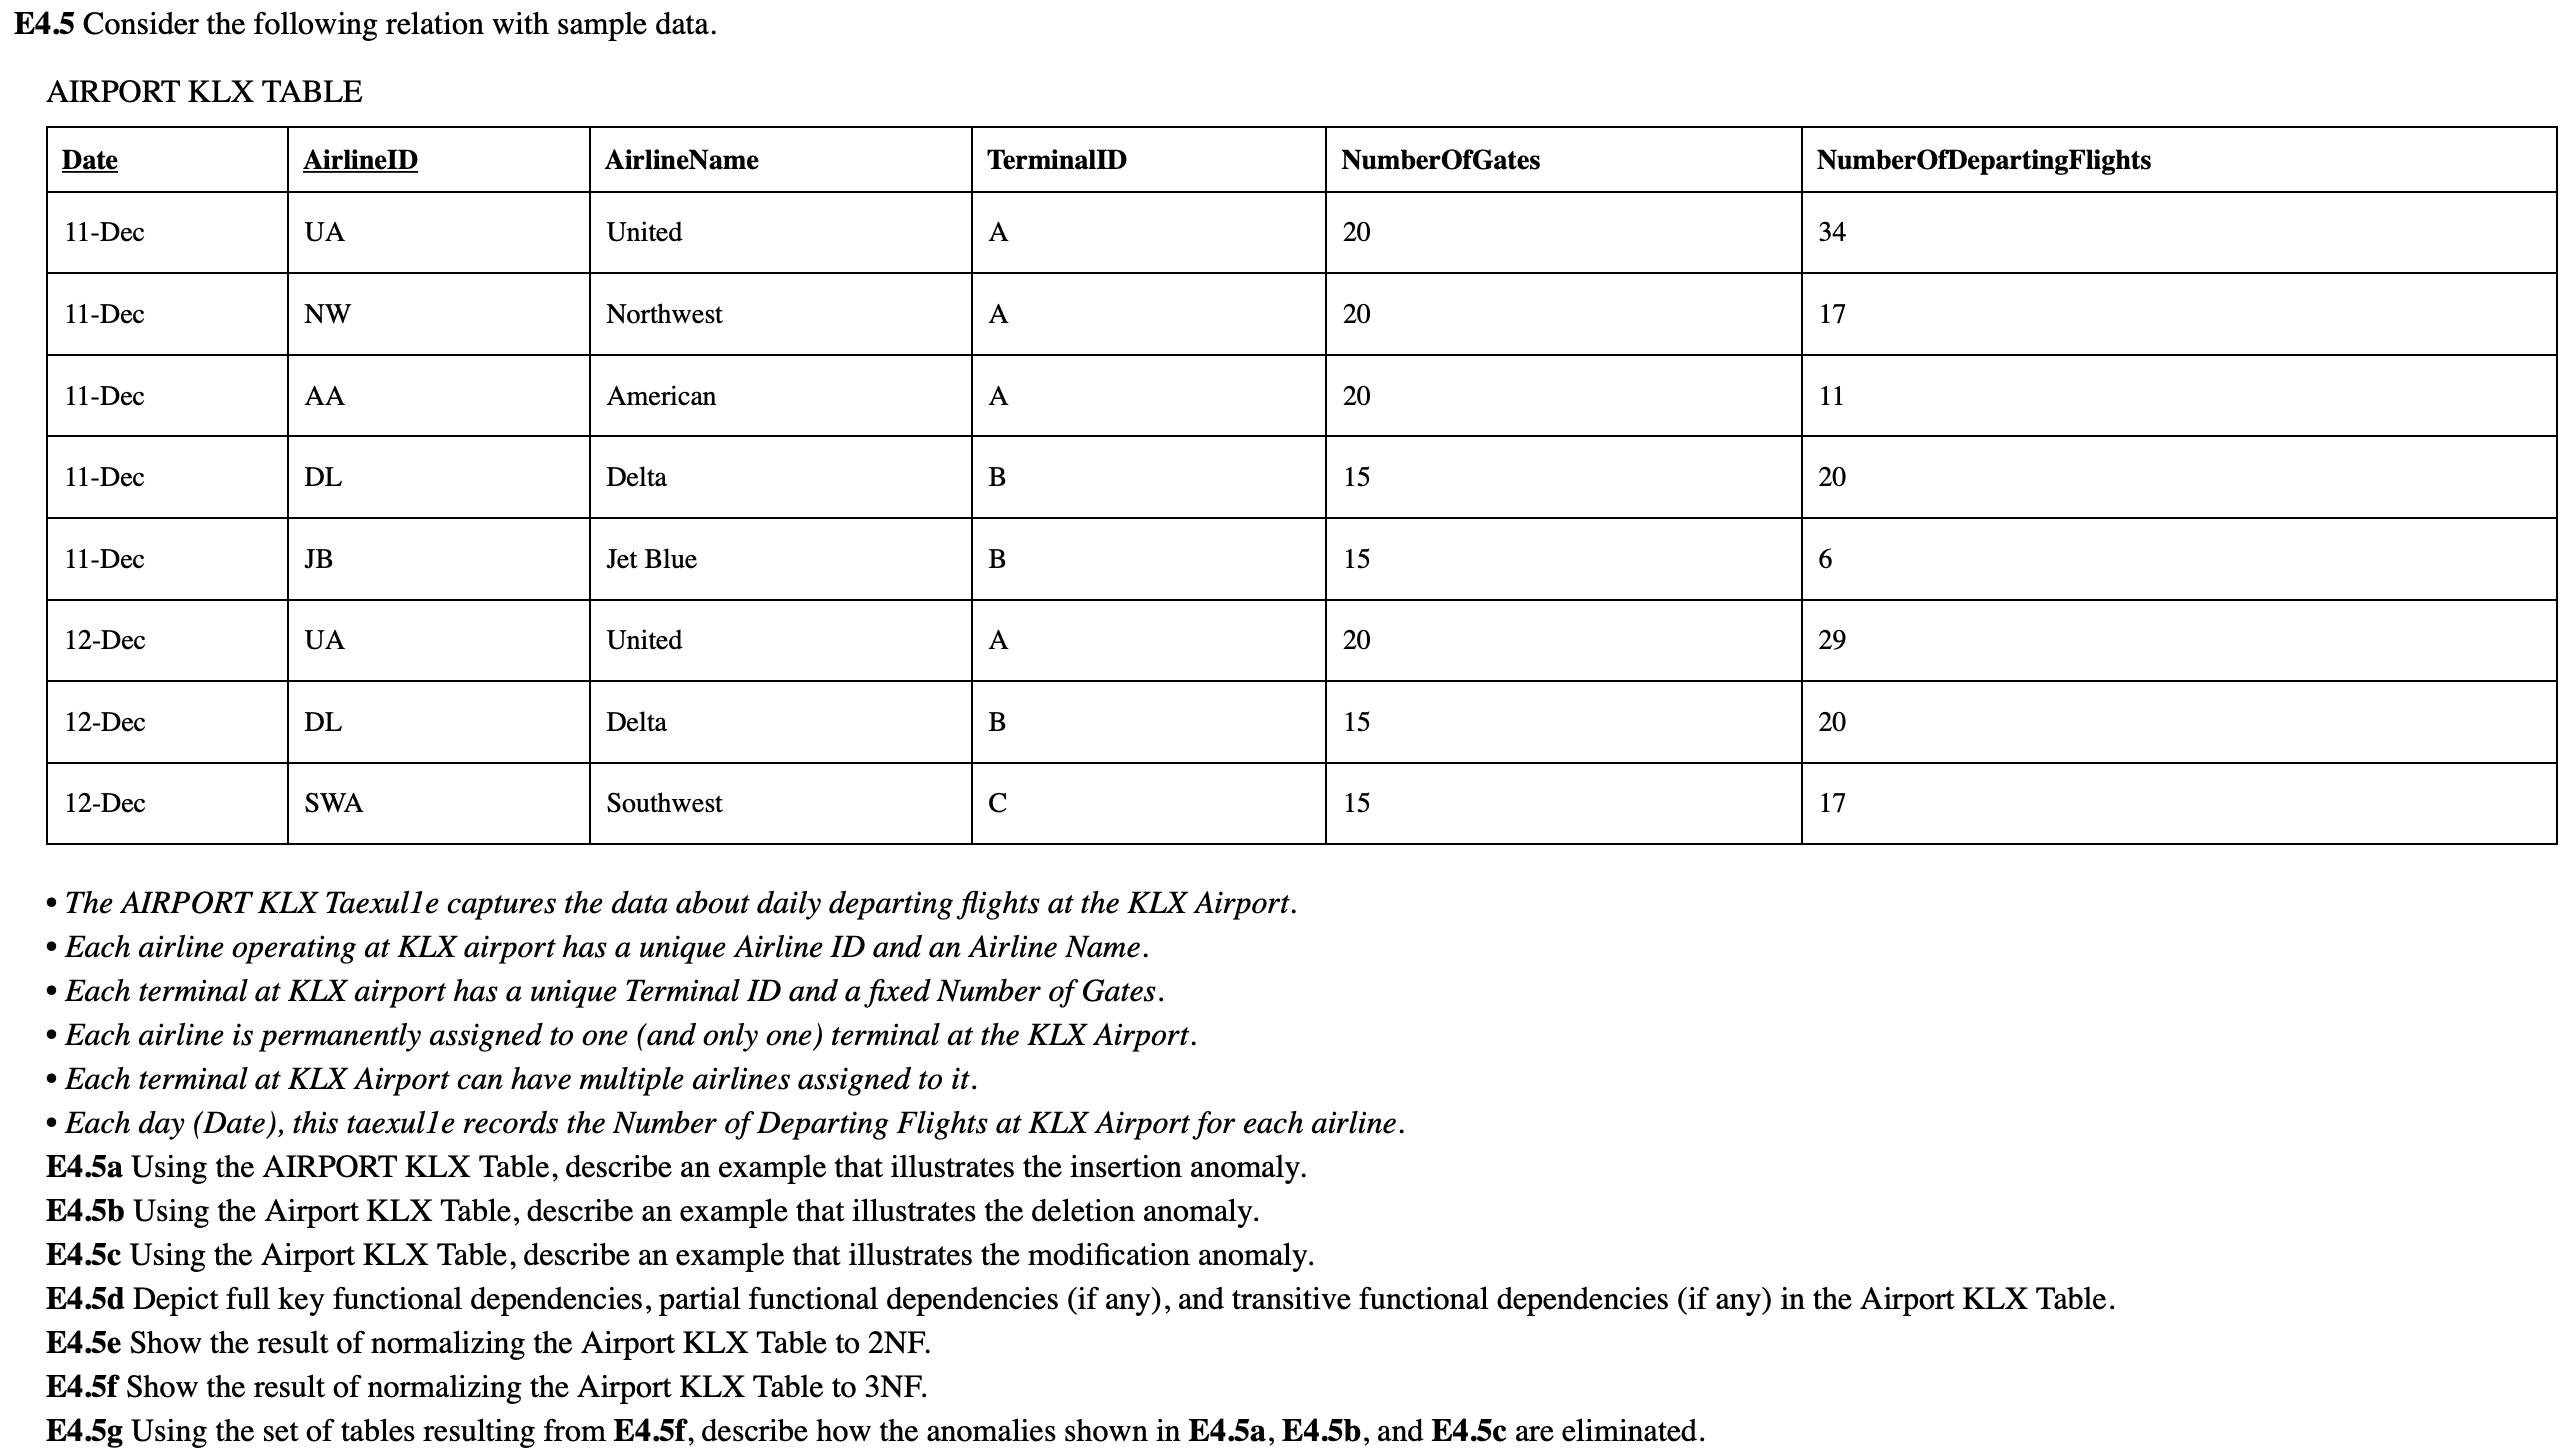 E4.5a Using the AIRPORT KLX Table, describe an example that illustrates the insertion anomaly.
E4.5b Using the Airport KLX Table, describe an example that illustrates the deletion anomaly.
E4.5c Using the Airport KLX Table, describe an example that illustrates the modification anomaly.
E4.5d Depict full key functional dependencies, partial functional dependencies (if any), and transitive functional dependencies (if any) in the Airport KLX Table.
E4.5e Show the result of normalizing the Airport KLX Table to 2NF.
E4.5f Show the result of normalizing the Airport KLX Table to 3NF.
E4.5g Using the set of tables resulting from E4.5f, describe how the anomalies shown in E4.5a, E4.5b, and E4.5c are eliminated.
